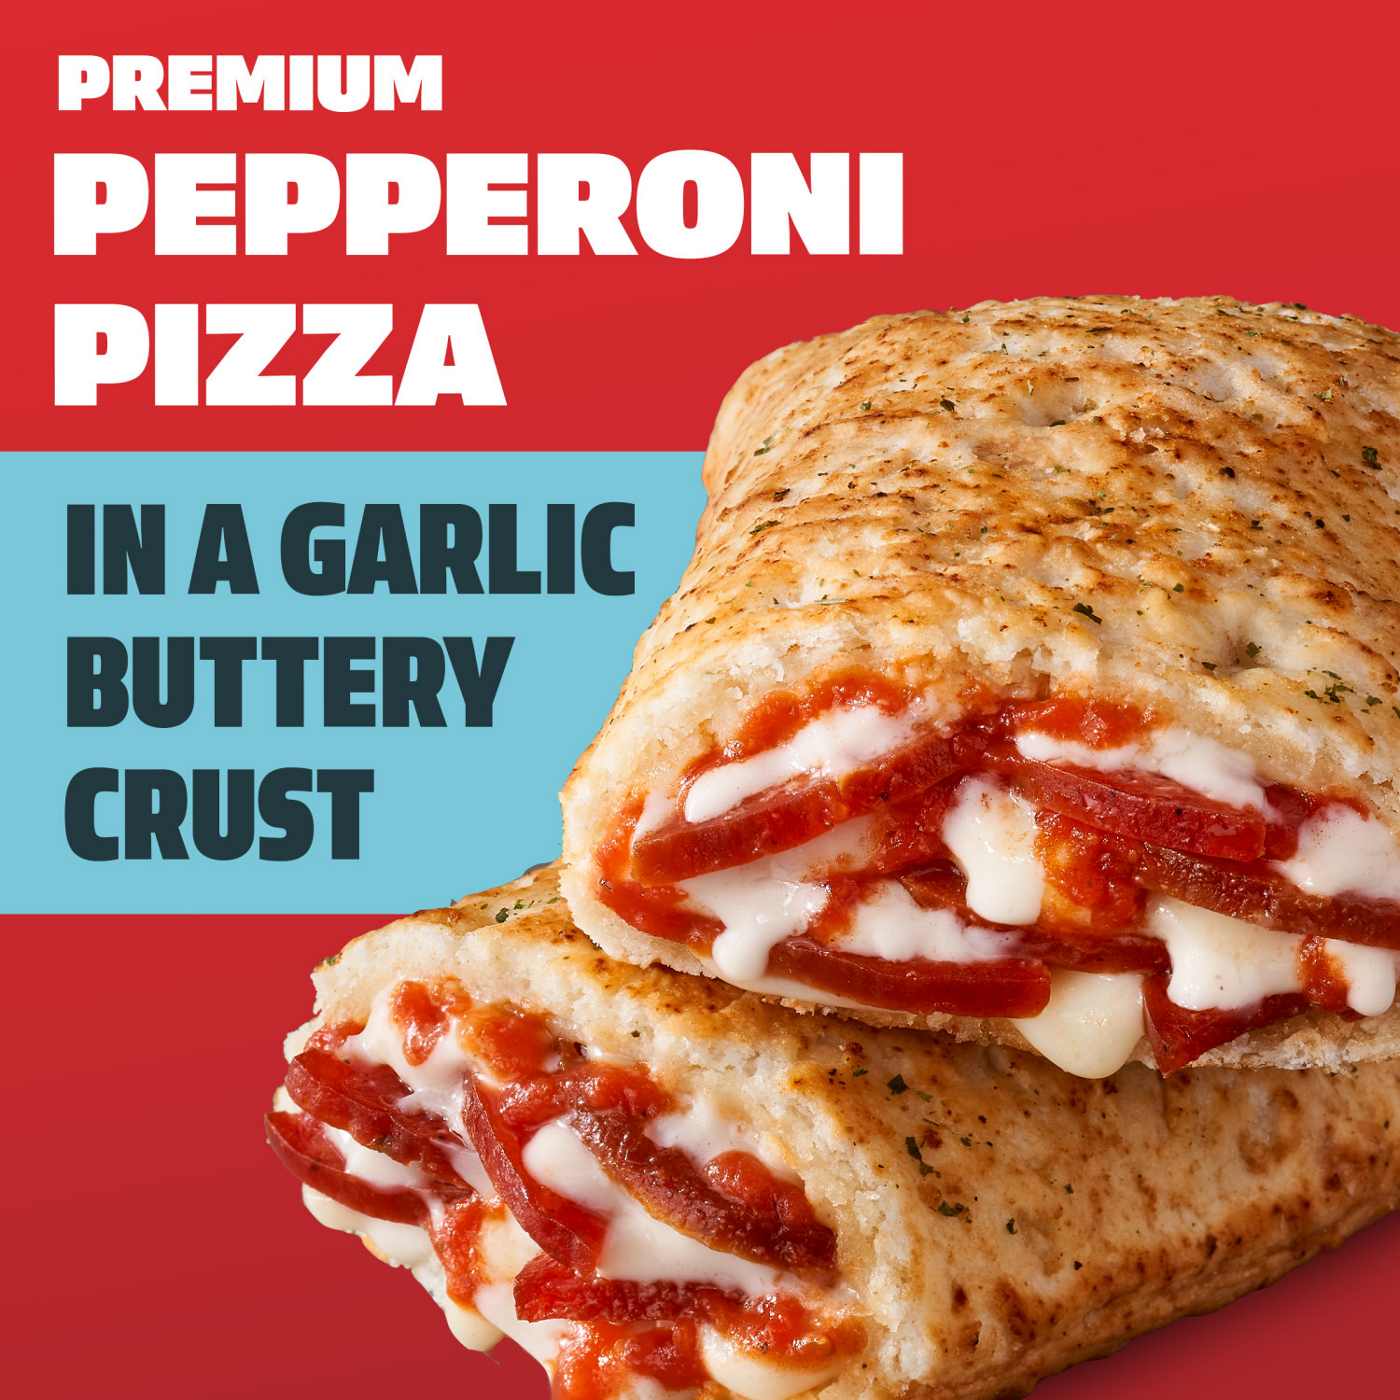 Hot Pockets Pepperoni Pizza Frozen Sandwiches - Garlic Buttery Crust; image 4 of 7